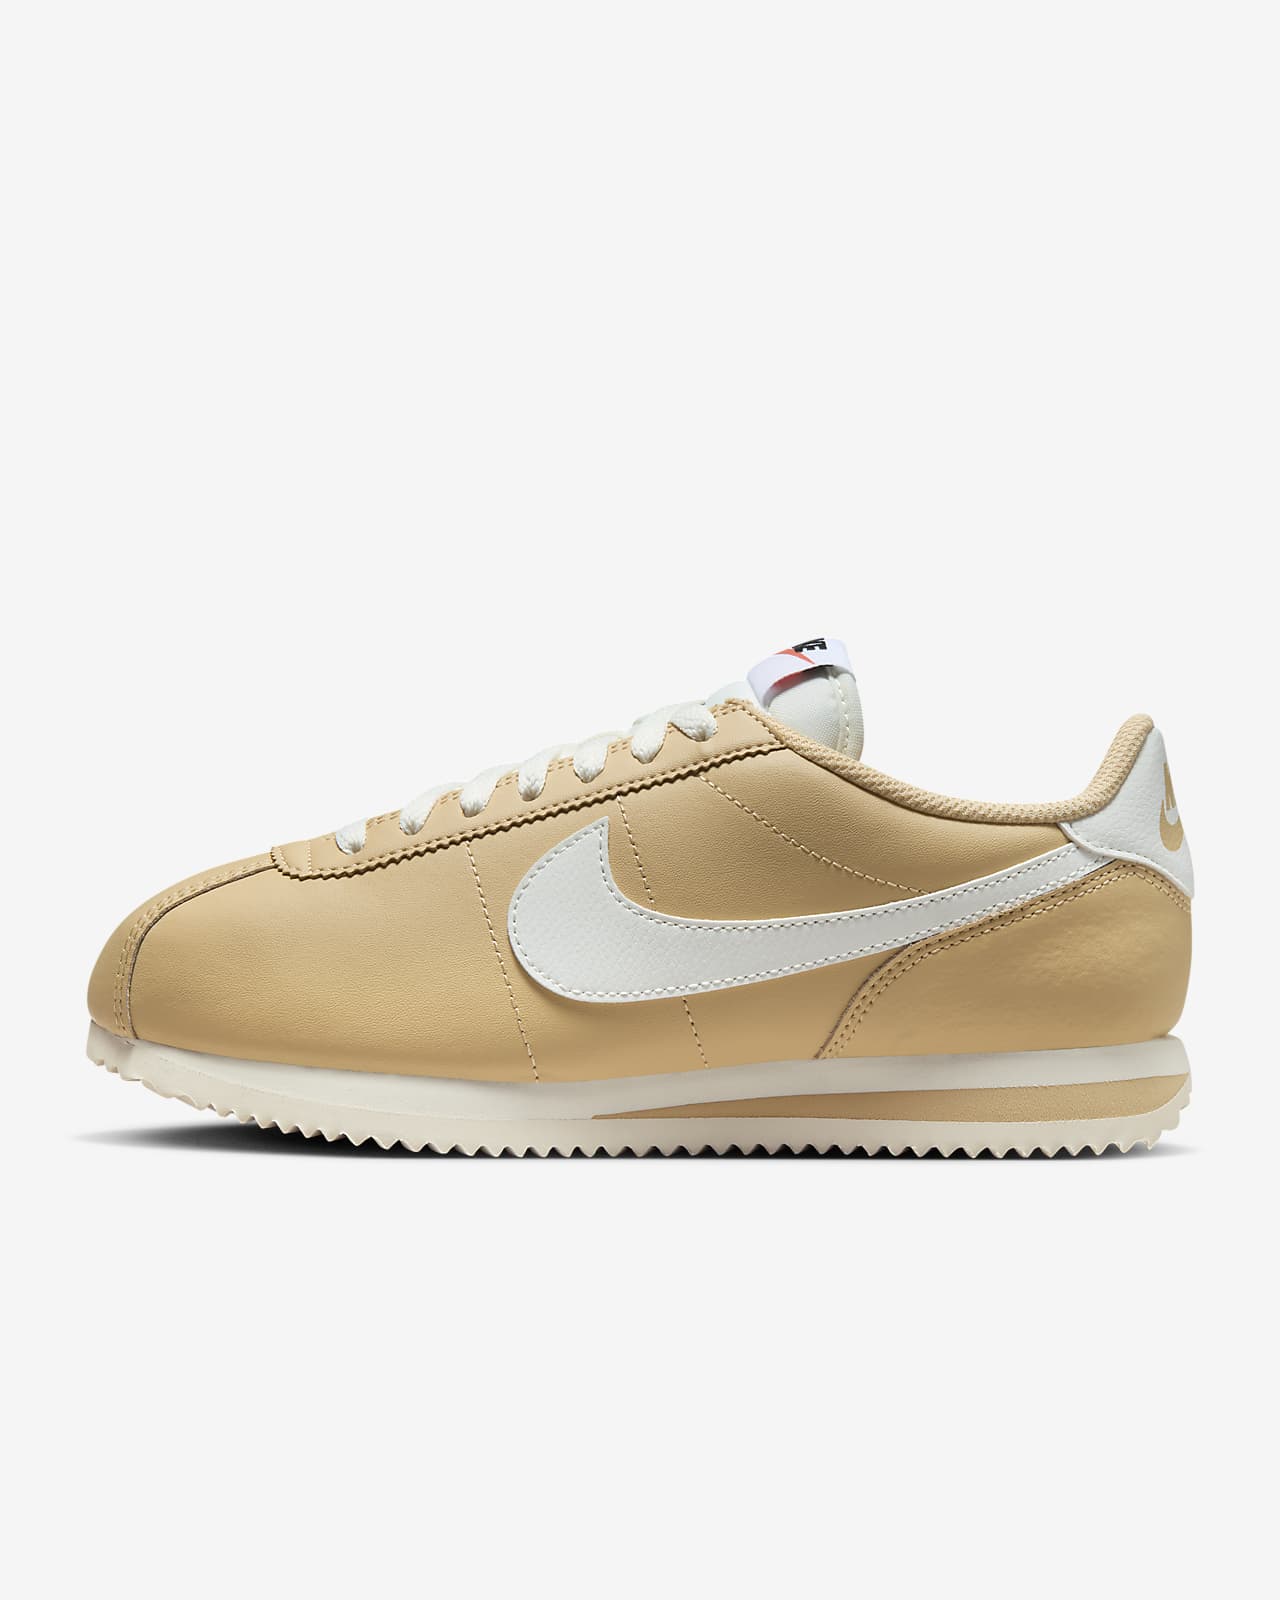 Nike's Cortez SE Arrives in Black and Gold